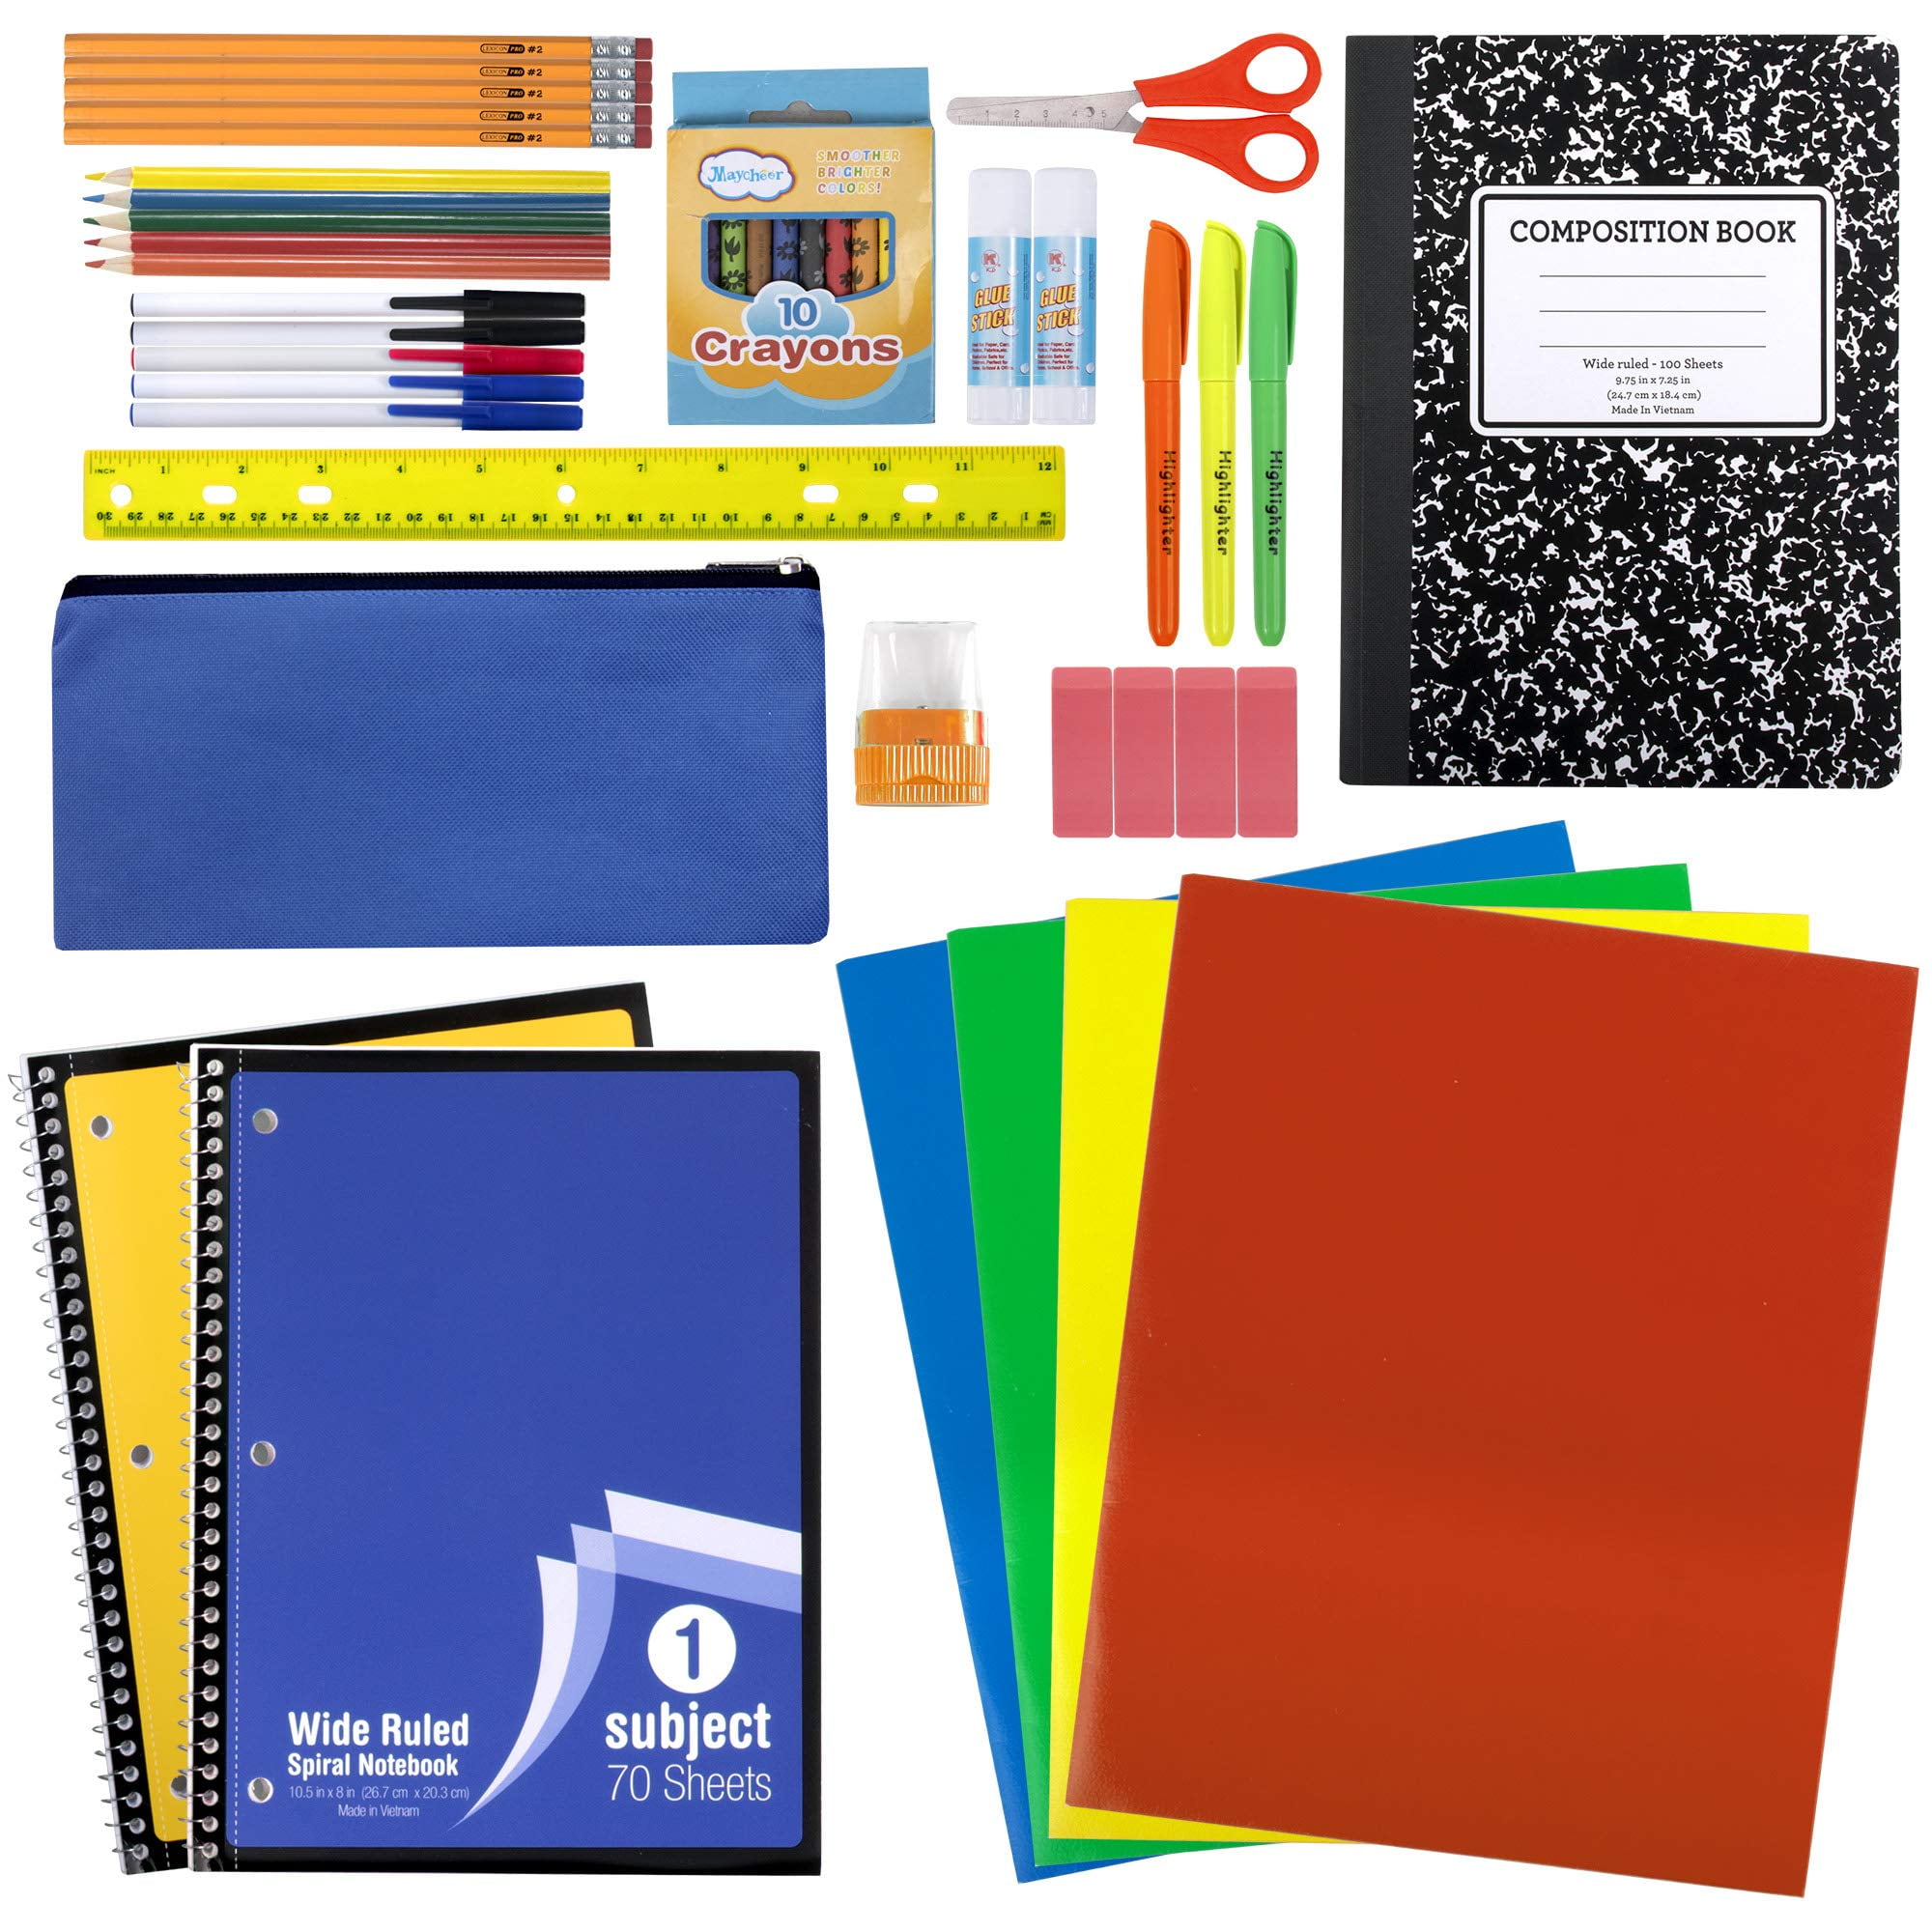 Trailmaker, 12 Pack of 45 Piece Wholesale School Supply Kit for Grades K-12, Includes Folders Notebooks Pencils Pens and Much More!, Multicolor